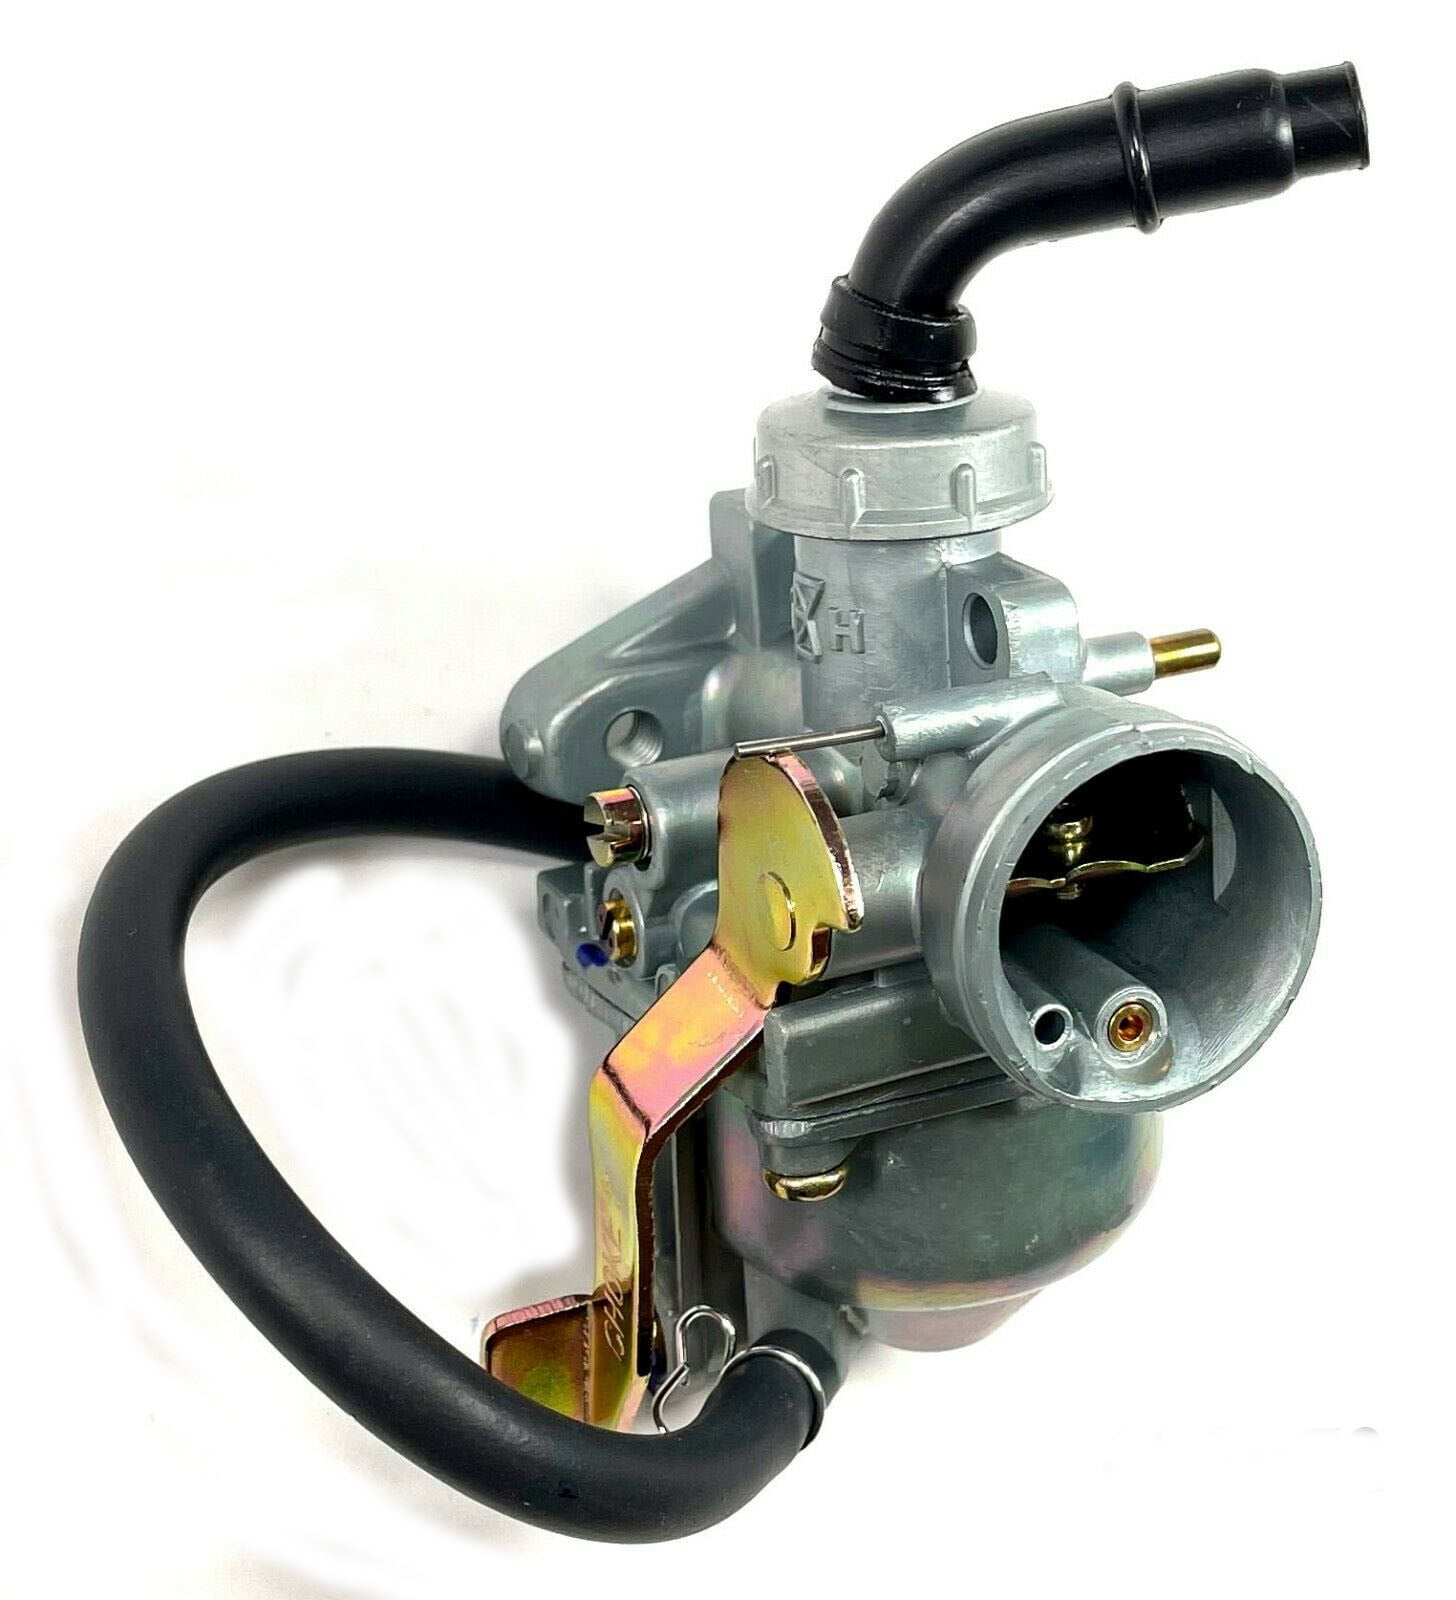 New Replacement Carburetor For Honda Crf50 Xr50 Z50 Crf Xr 50 Z50RStock Size Carburetor For Honda Crf50 Xr50 Z50 Crf Xr 50 Z50R 